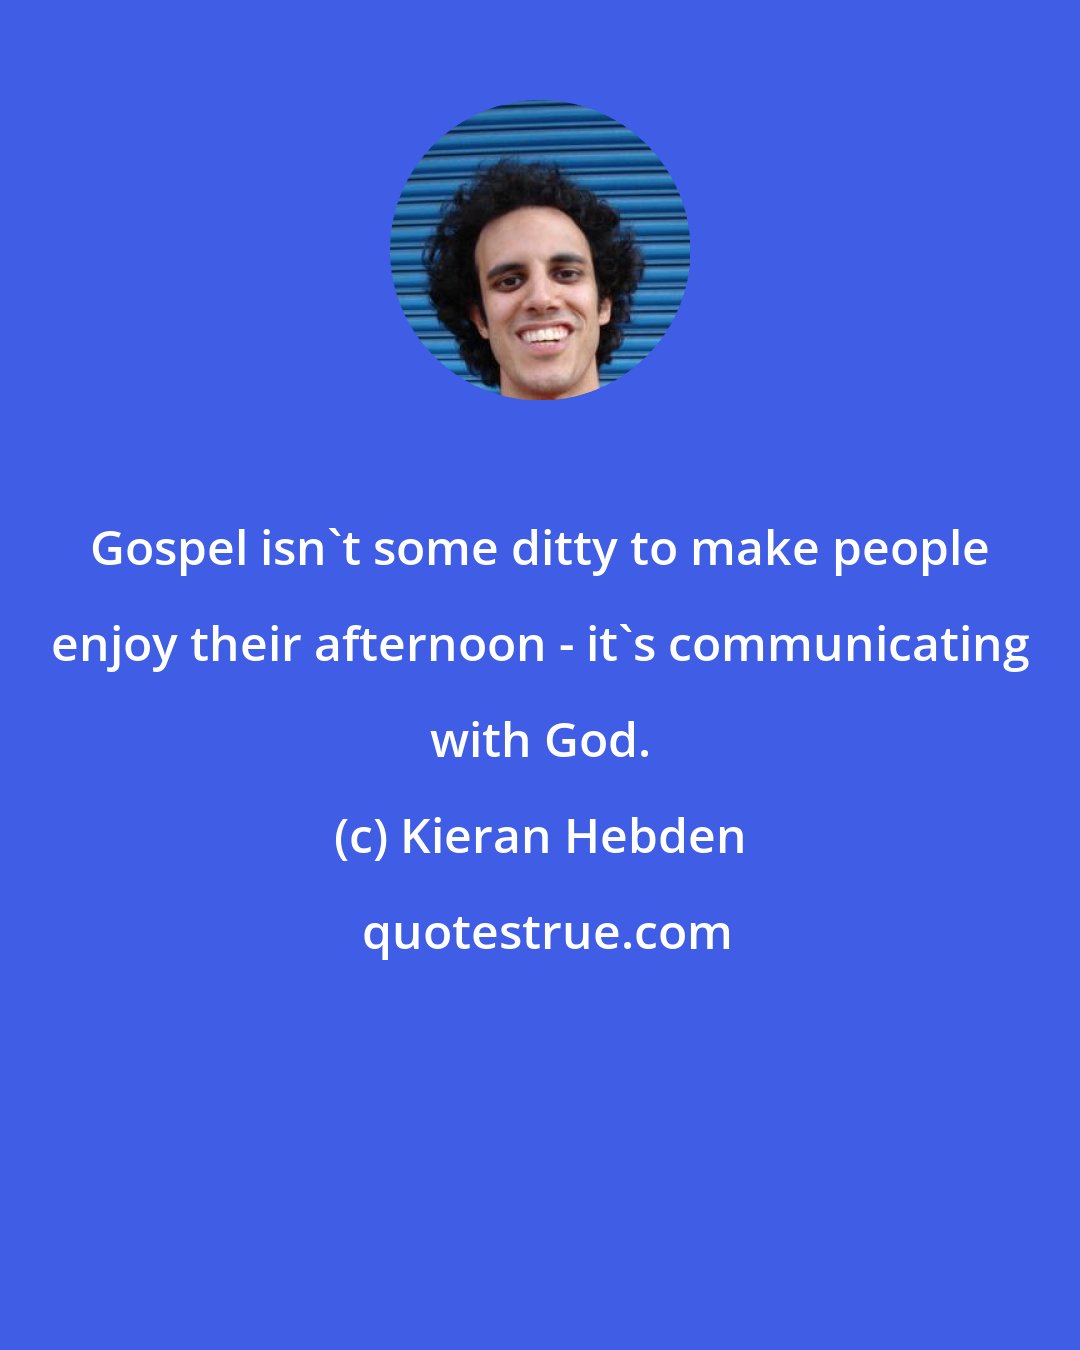 Kieran Hebden: Gospel isn't some ditty to make people enjoy their afternoon - it's communicating with God.